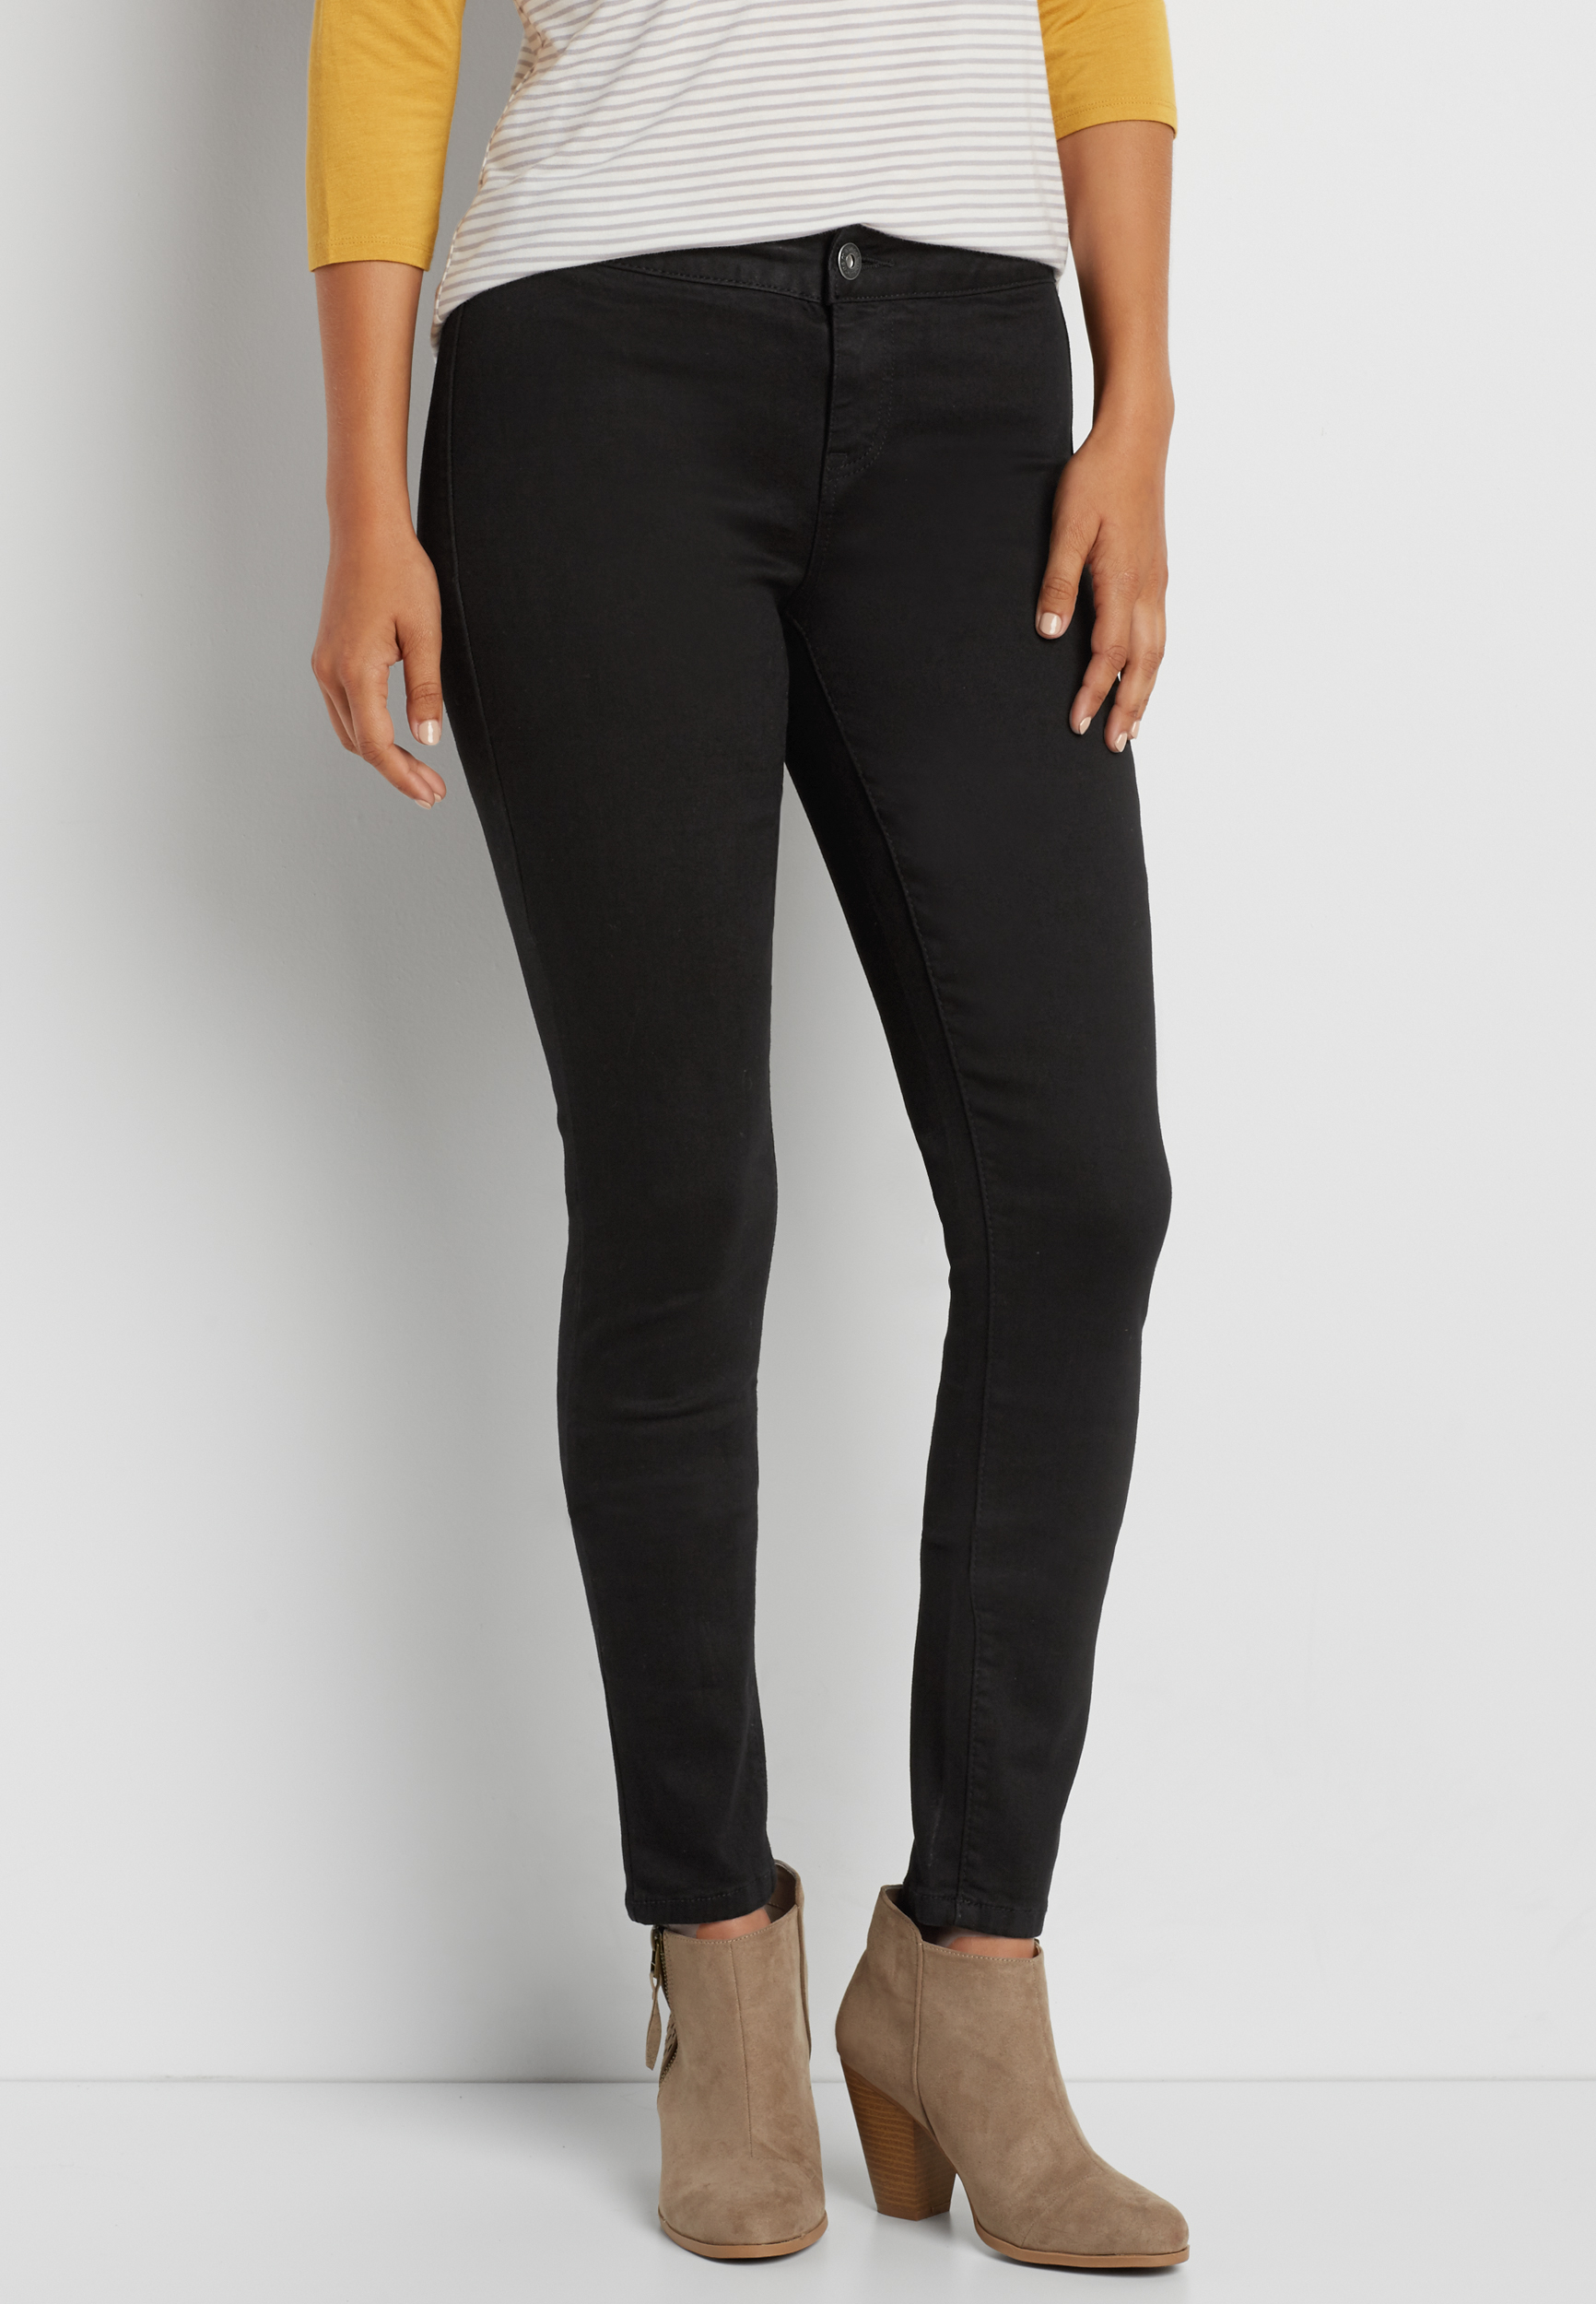 DenimFlex™ black jegging with no front pockets | maurices